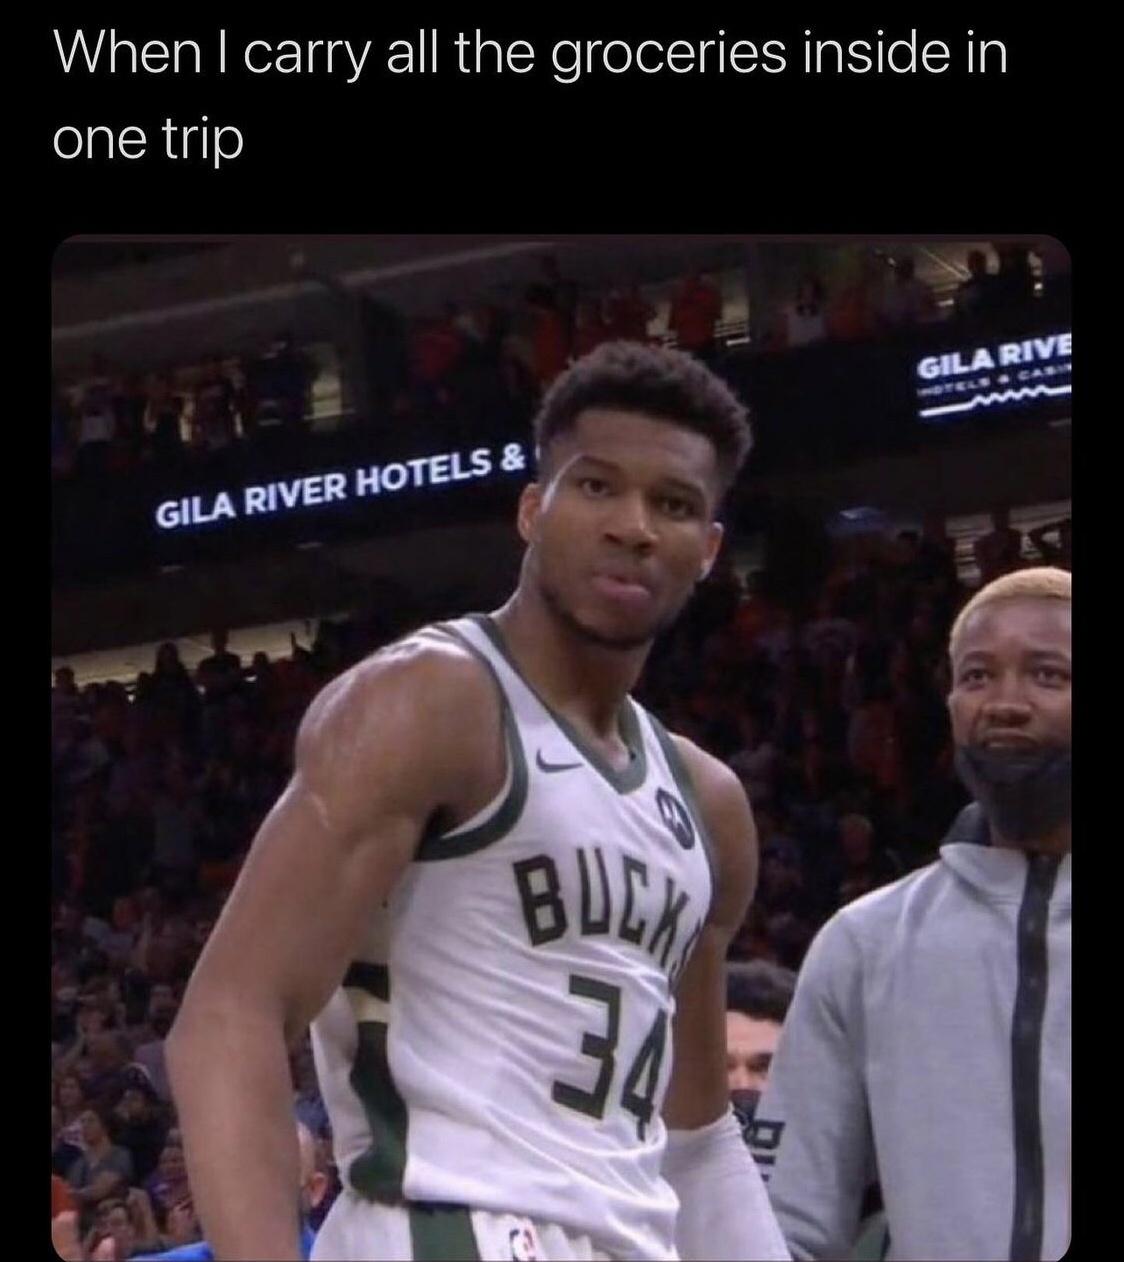 giannis stare at camera - When I carry all the groceries inside in one trip Gila Rive Hotels.Cas Gila River Hotels & Buex 34